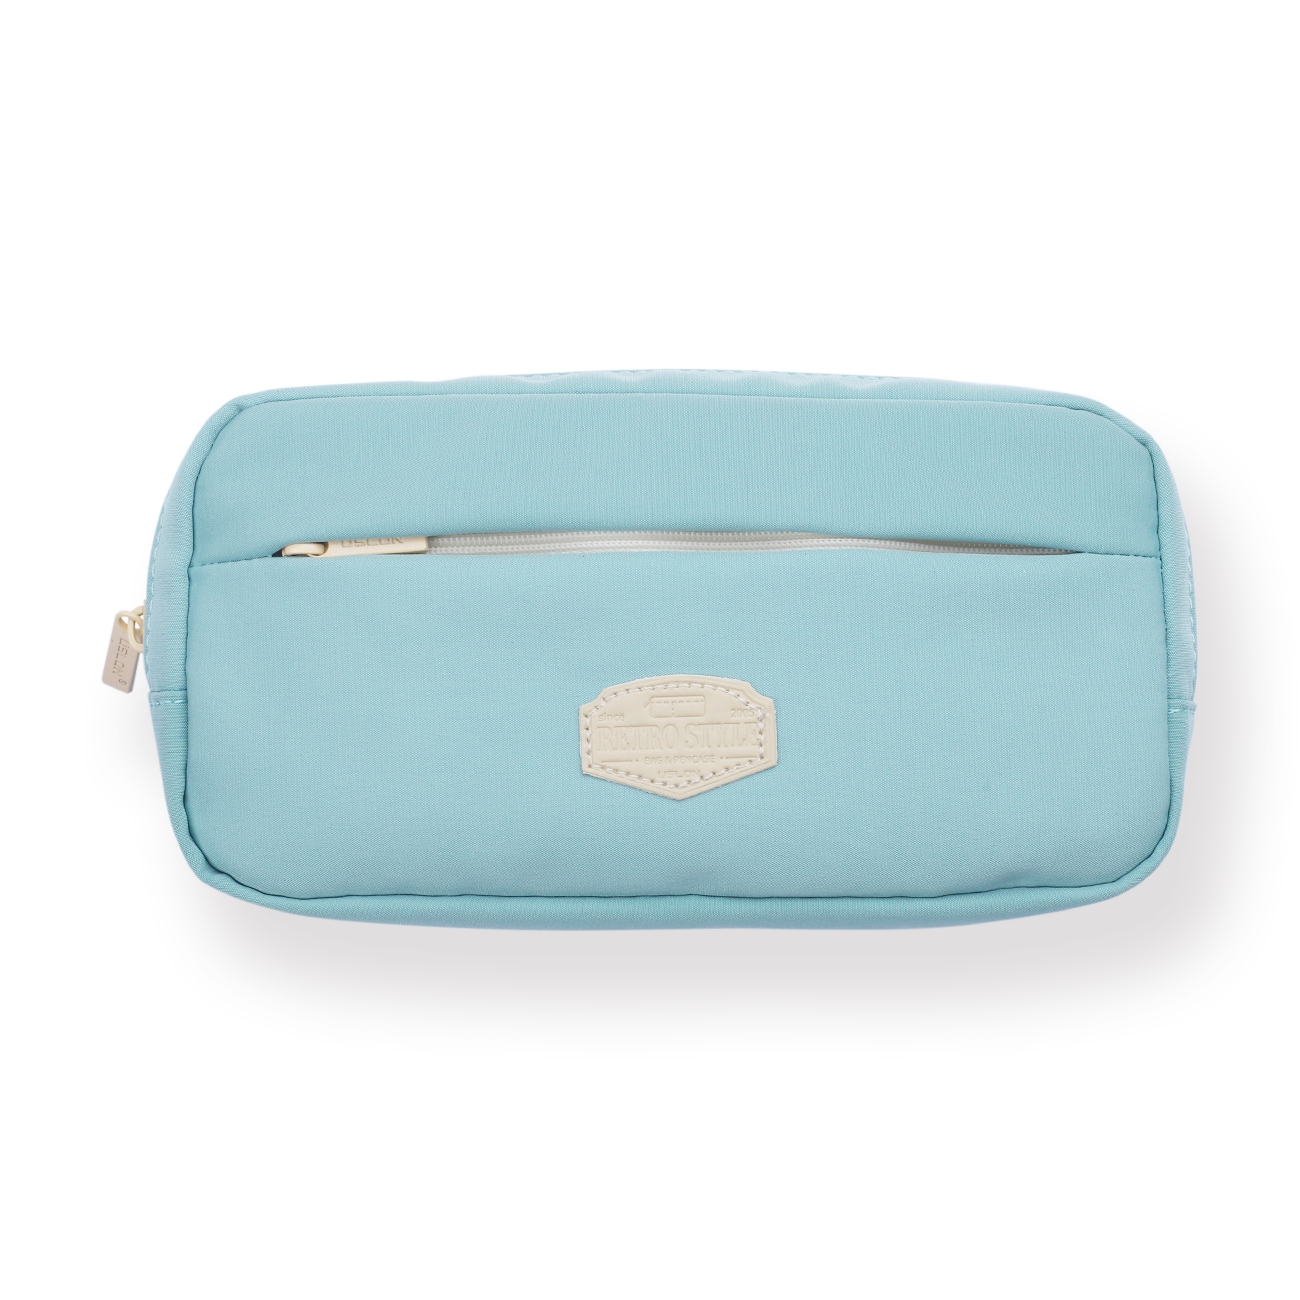 Stationery Pal Double Layer Pencil Case - Blue Green